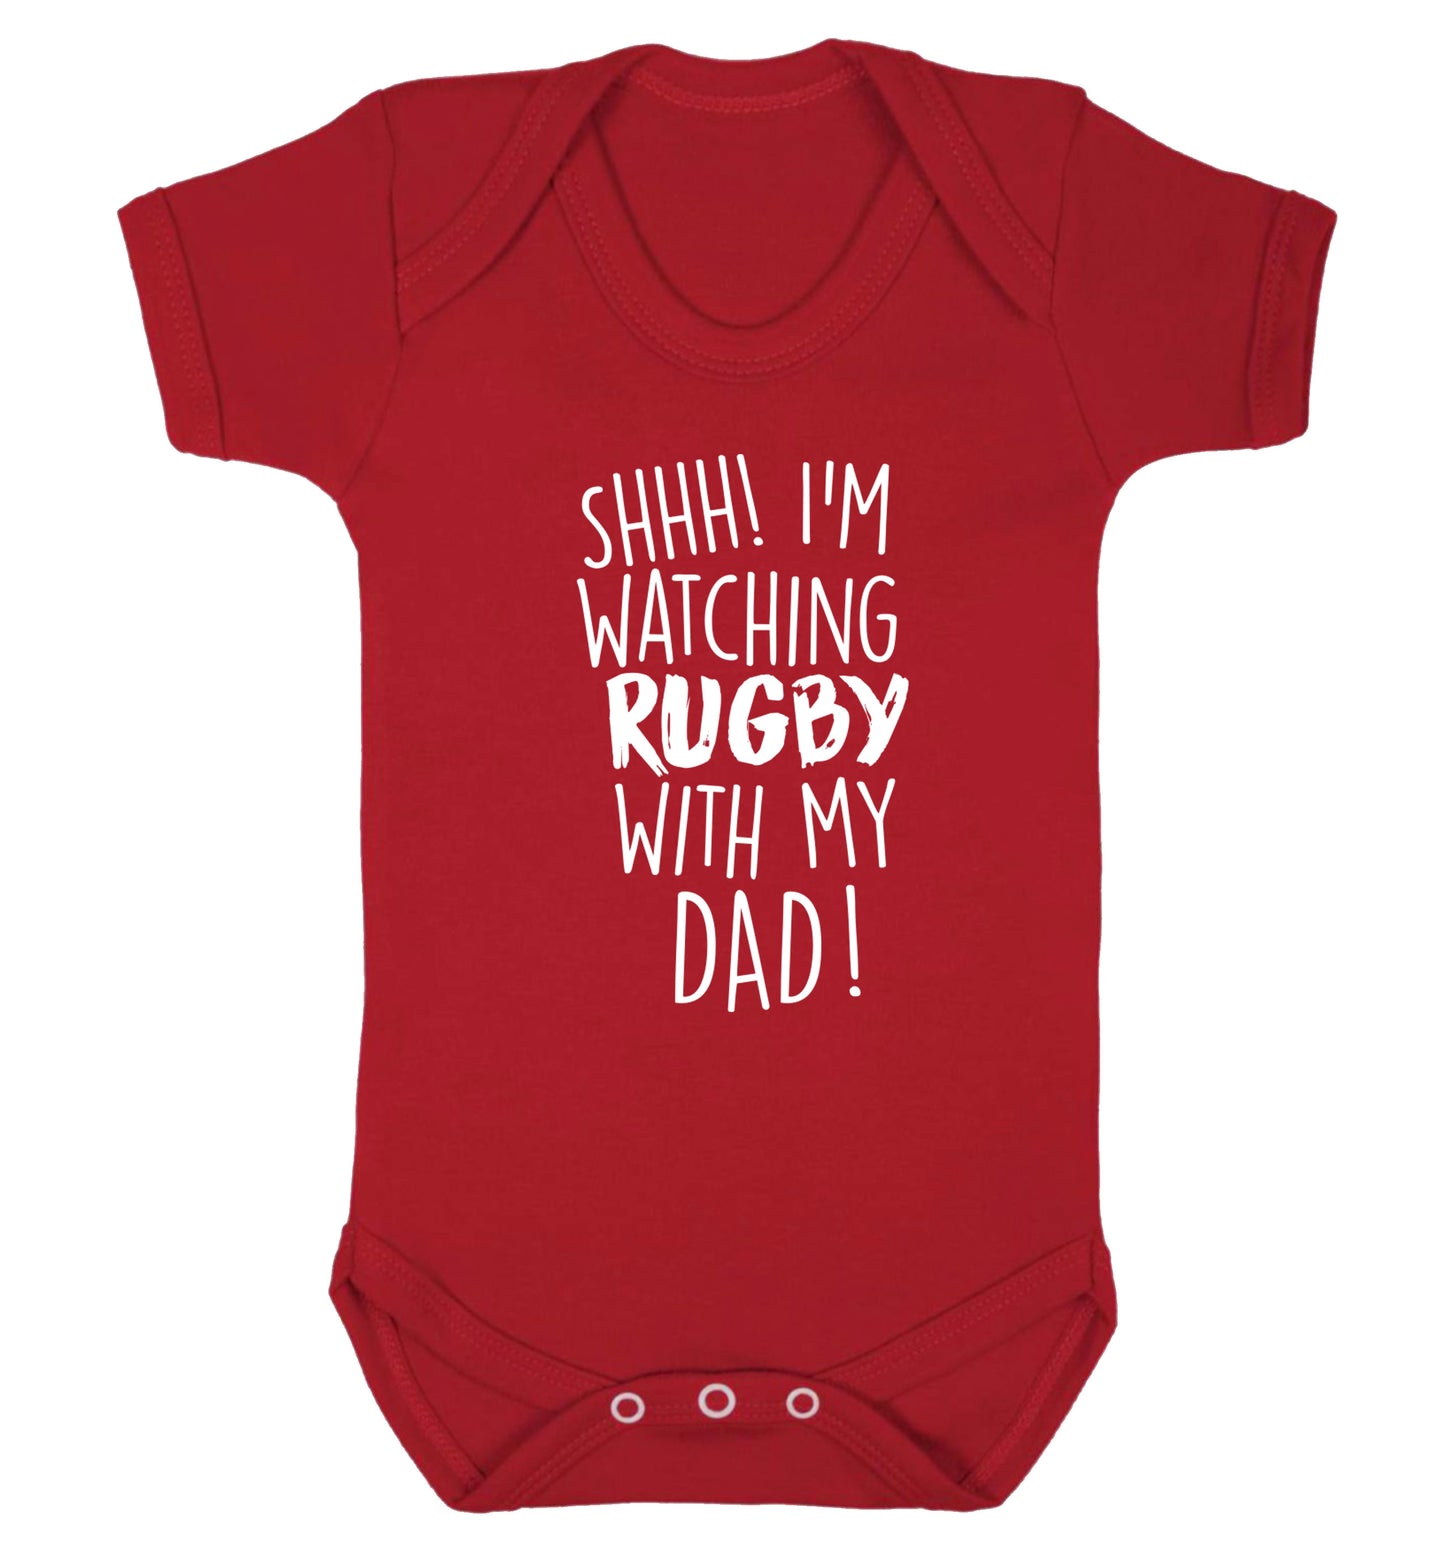 Shh... I'm watching rugby with my dad Baby Vest red 18-24 months